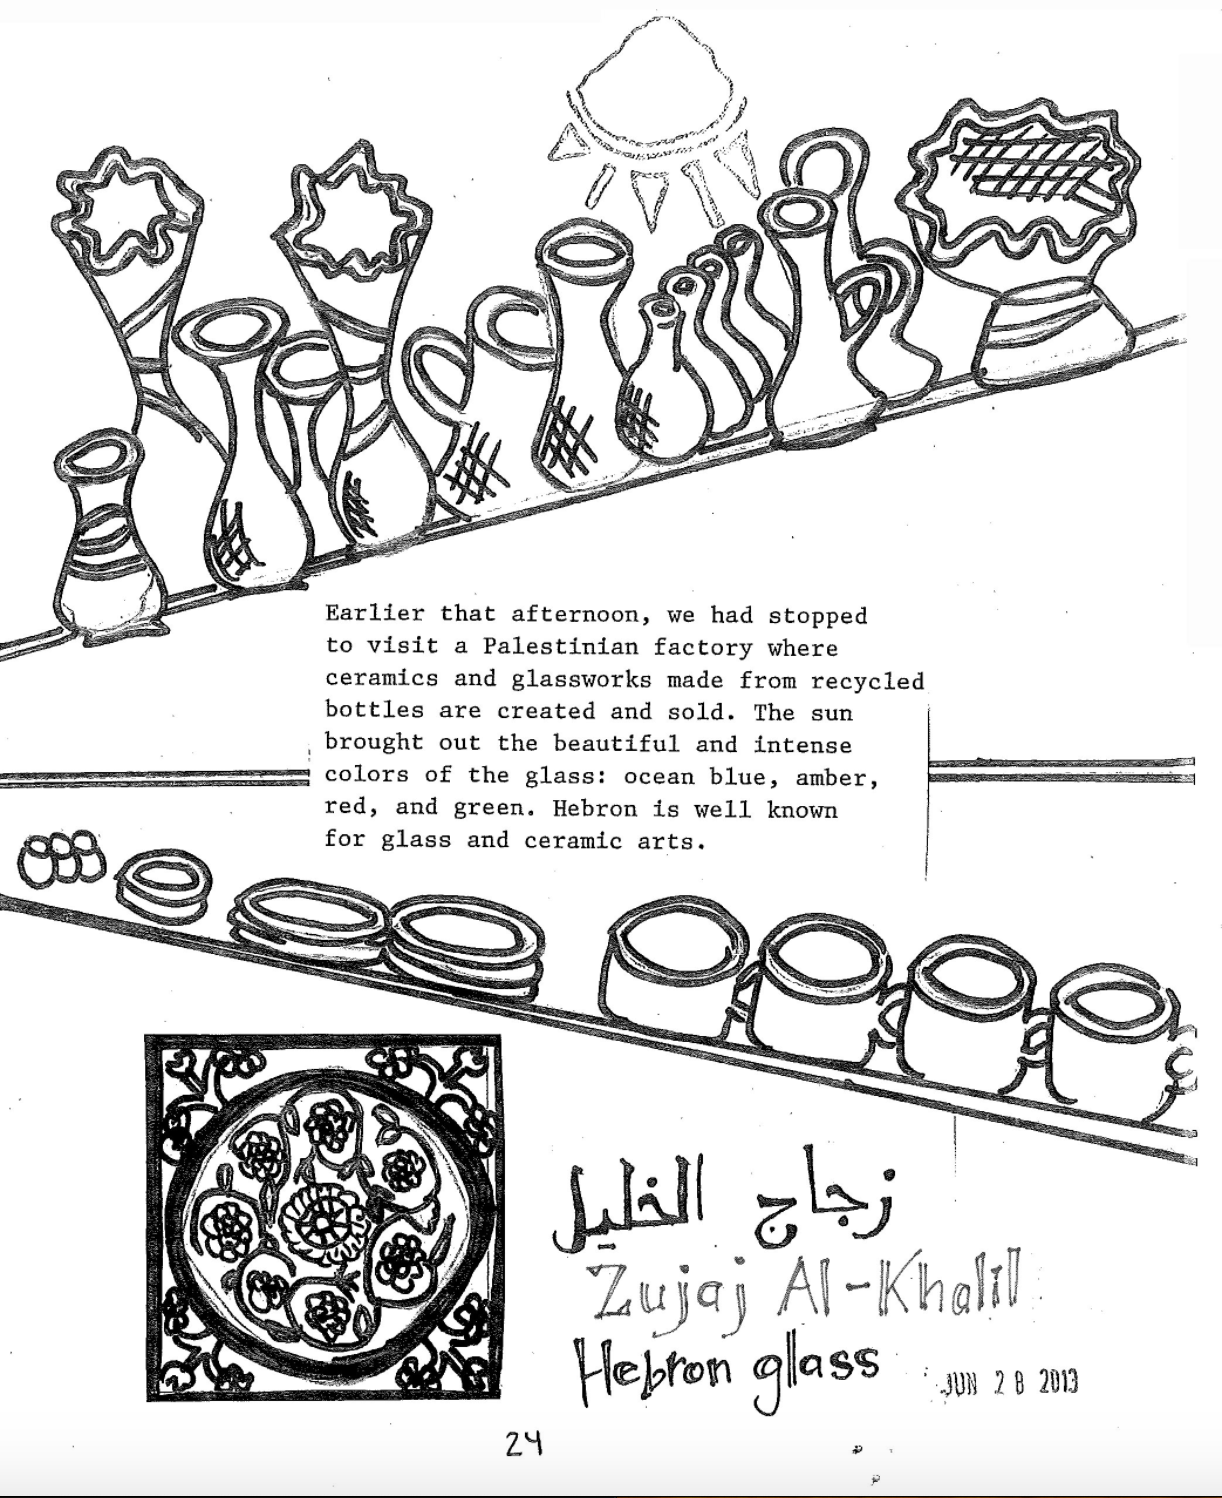 In a black and white rendering, drawings of small ceramic vessels slant up and down the page. In the center of the page is text describing the creator's visit to a Palestinian ceramics and glasswork factory. 